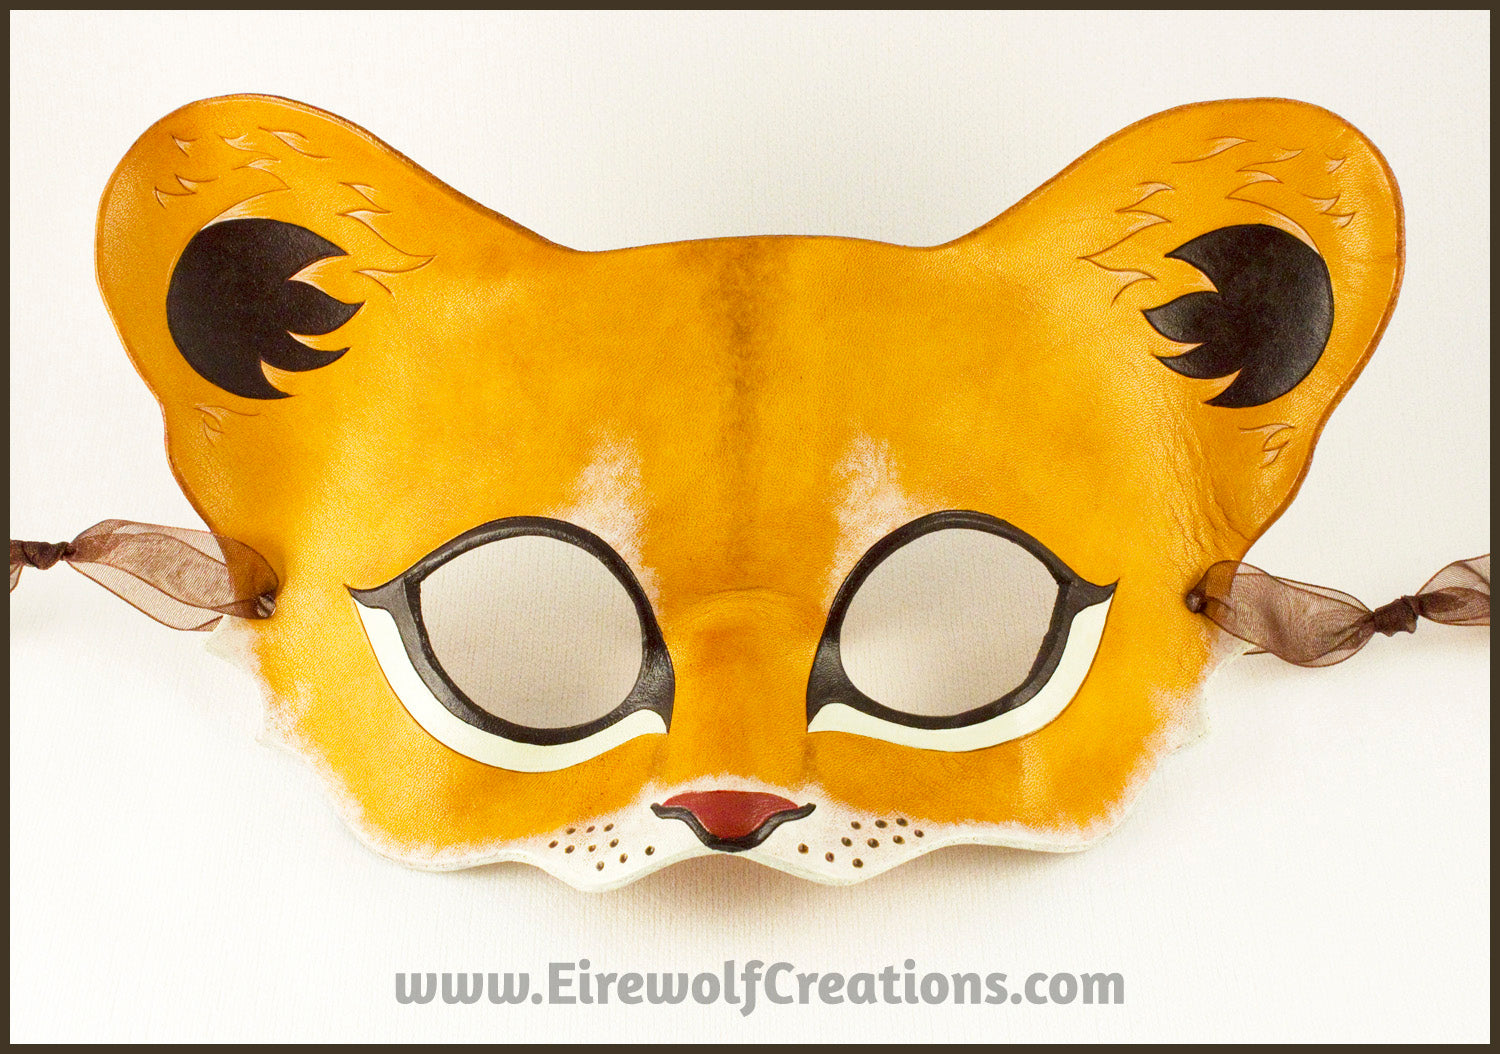 Lion Cub mask, handmade leather young lion wild cat mask for Halloween -  Eirewolf Creations